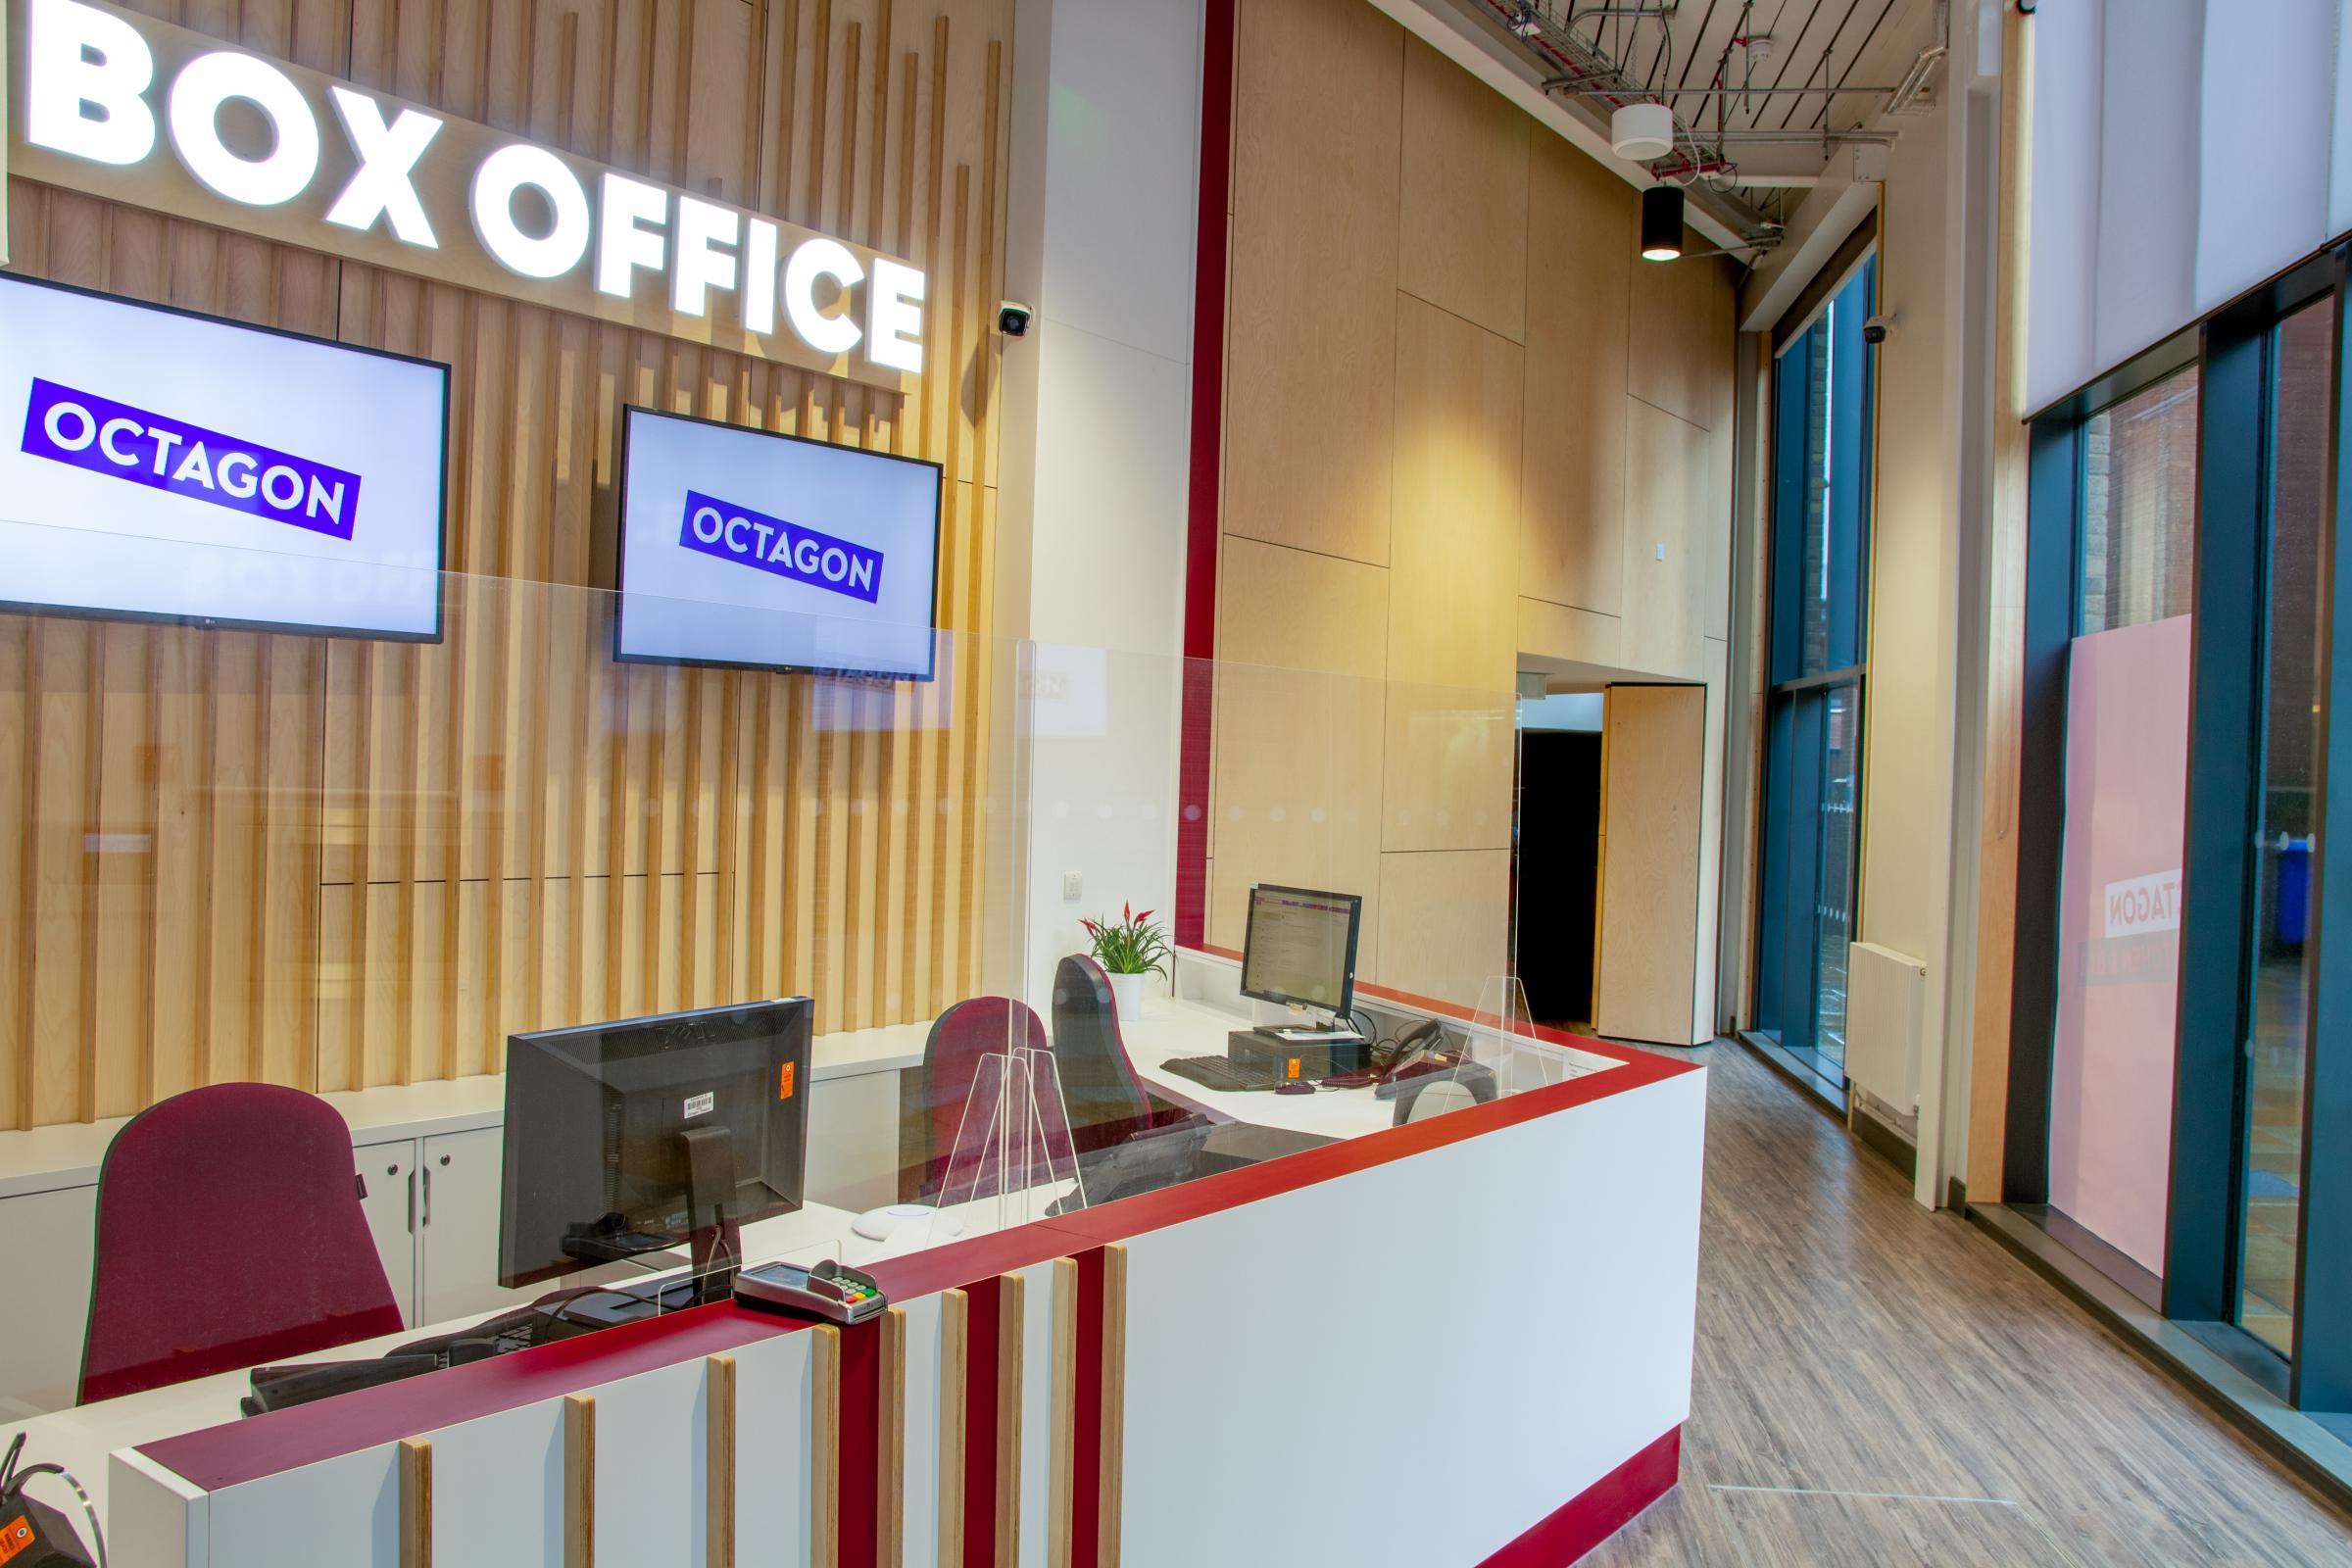 New look box office at Octagon Theatre